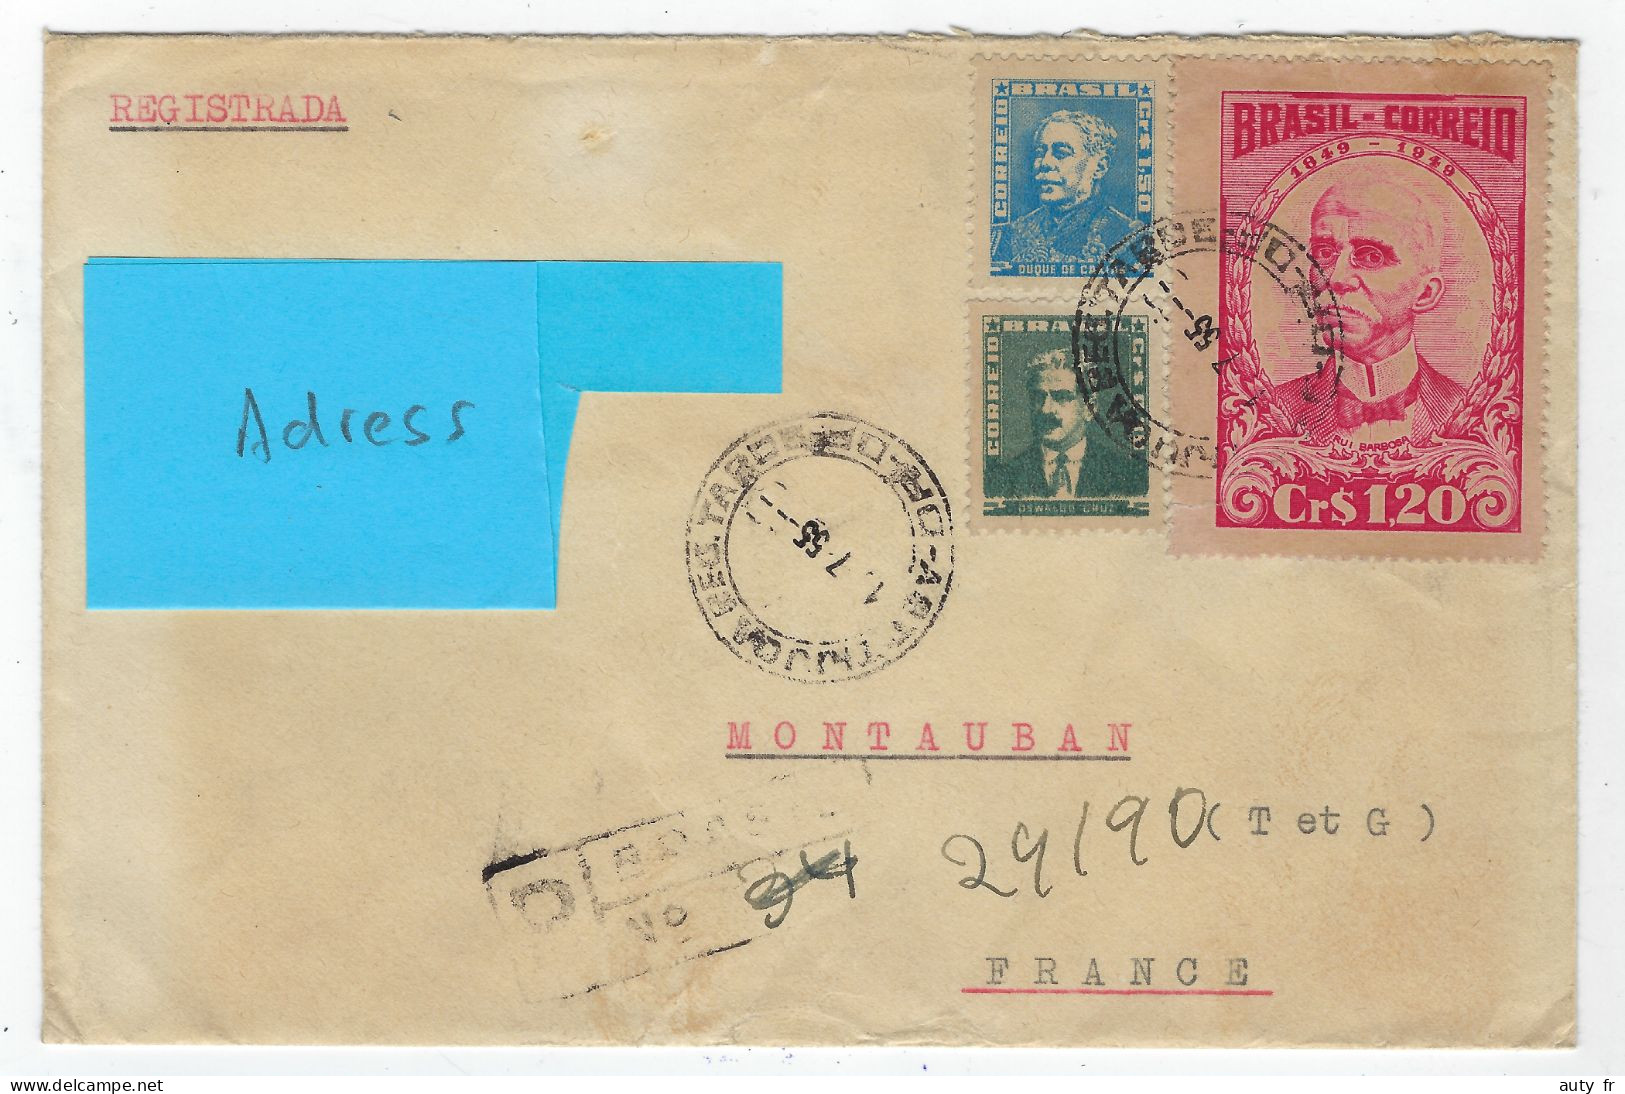 BRASIL - Cover From Rio De Janeiro To Montauban - Registered 1955 - Covers & Documents